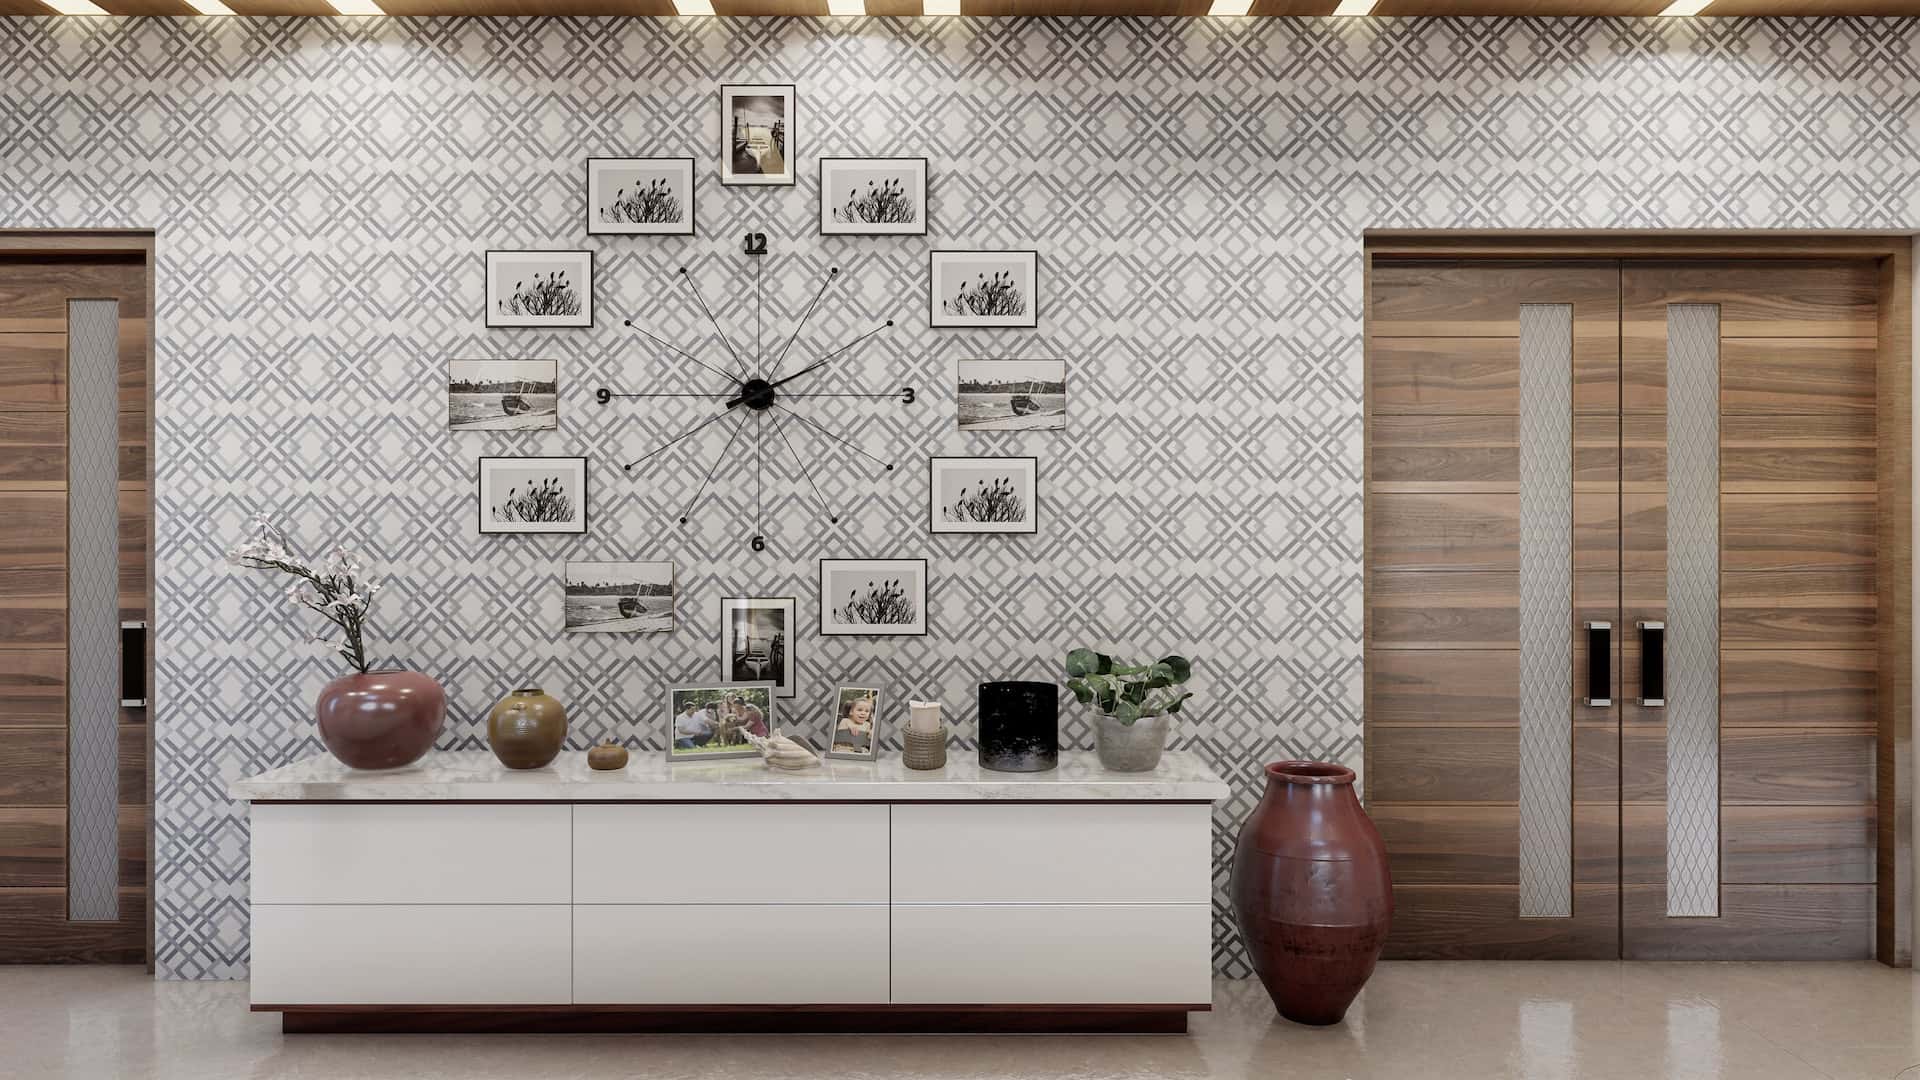 walls with 3d geometric patterns